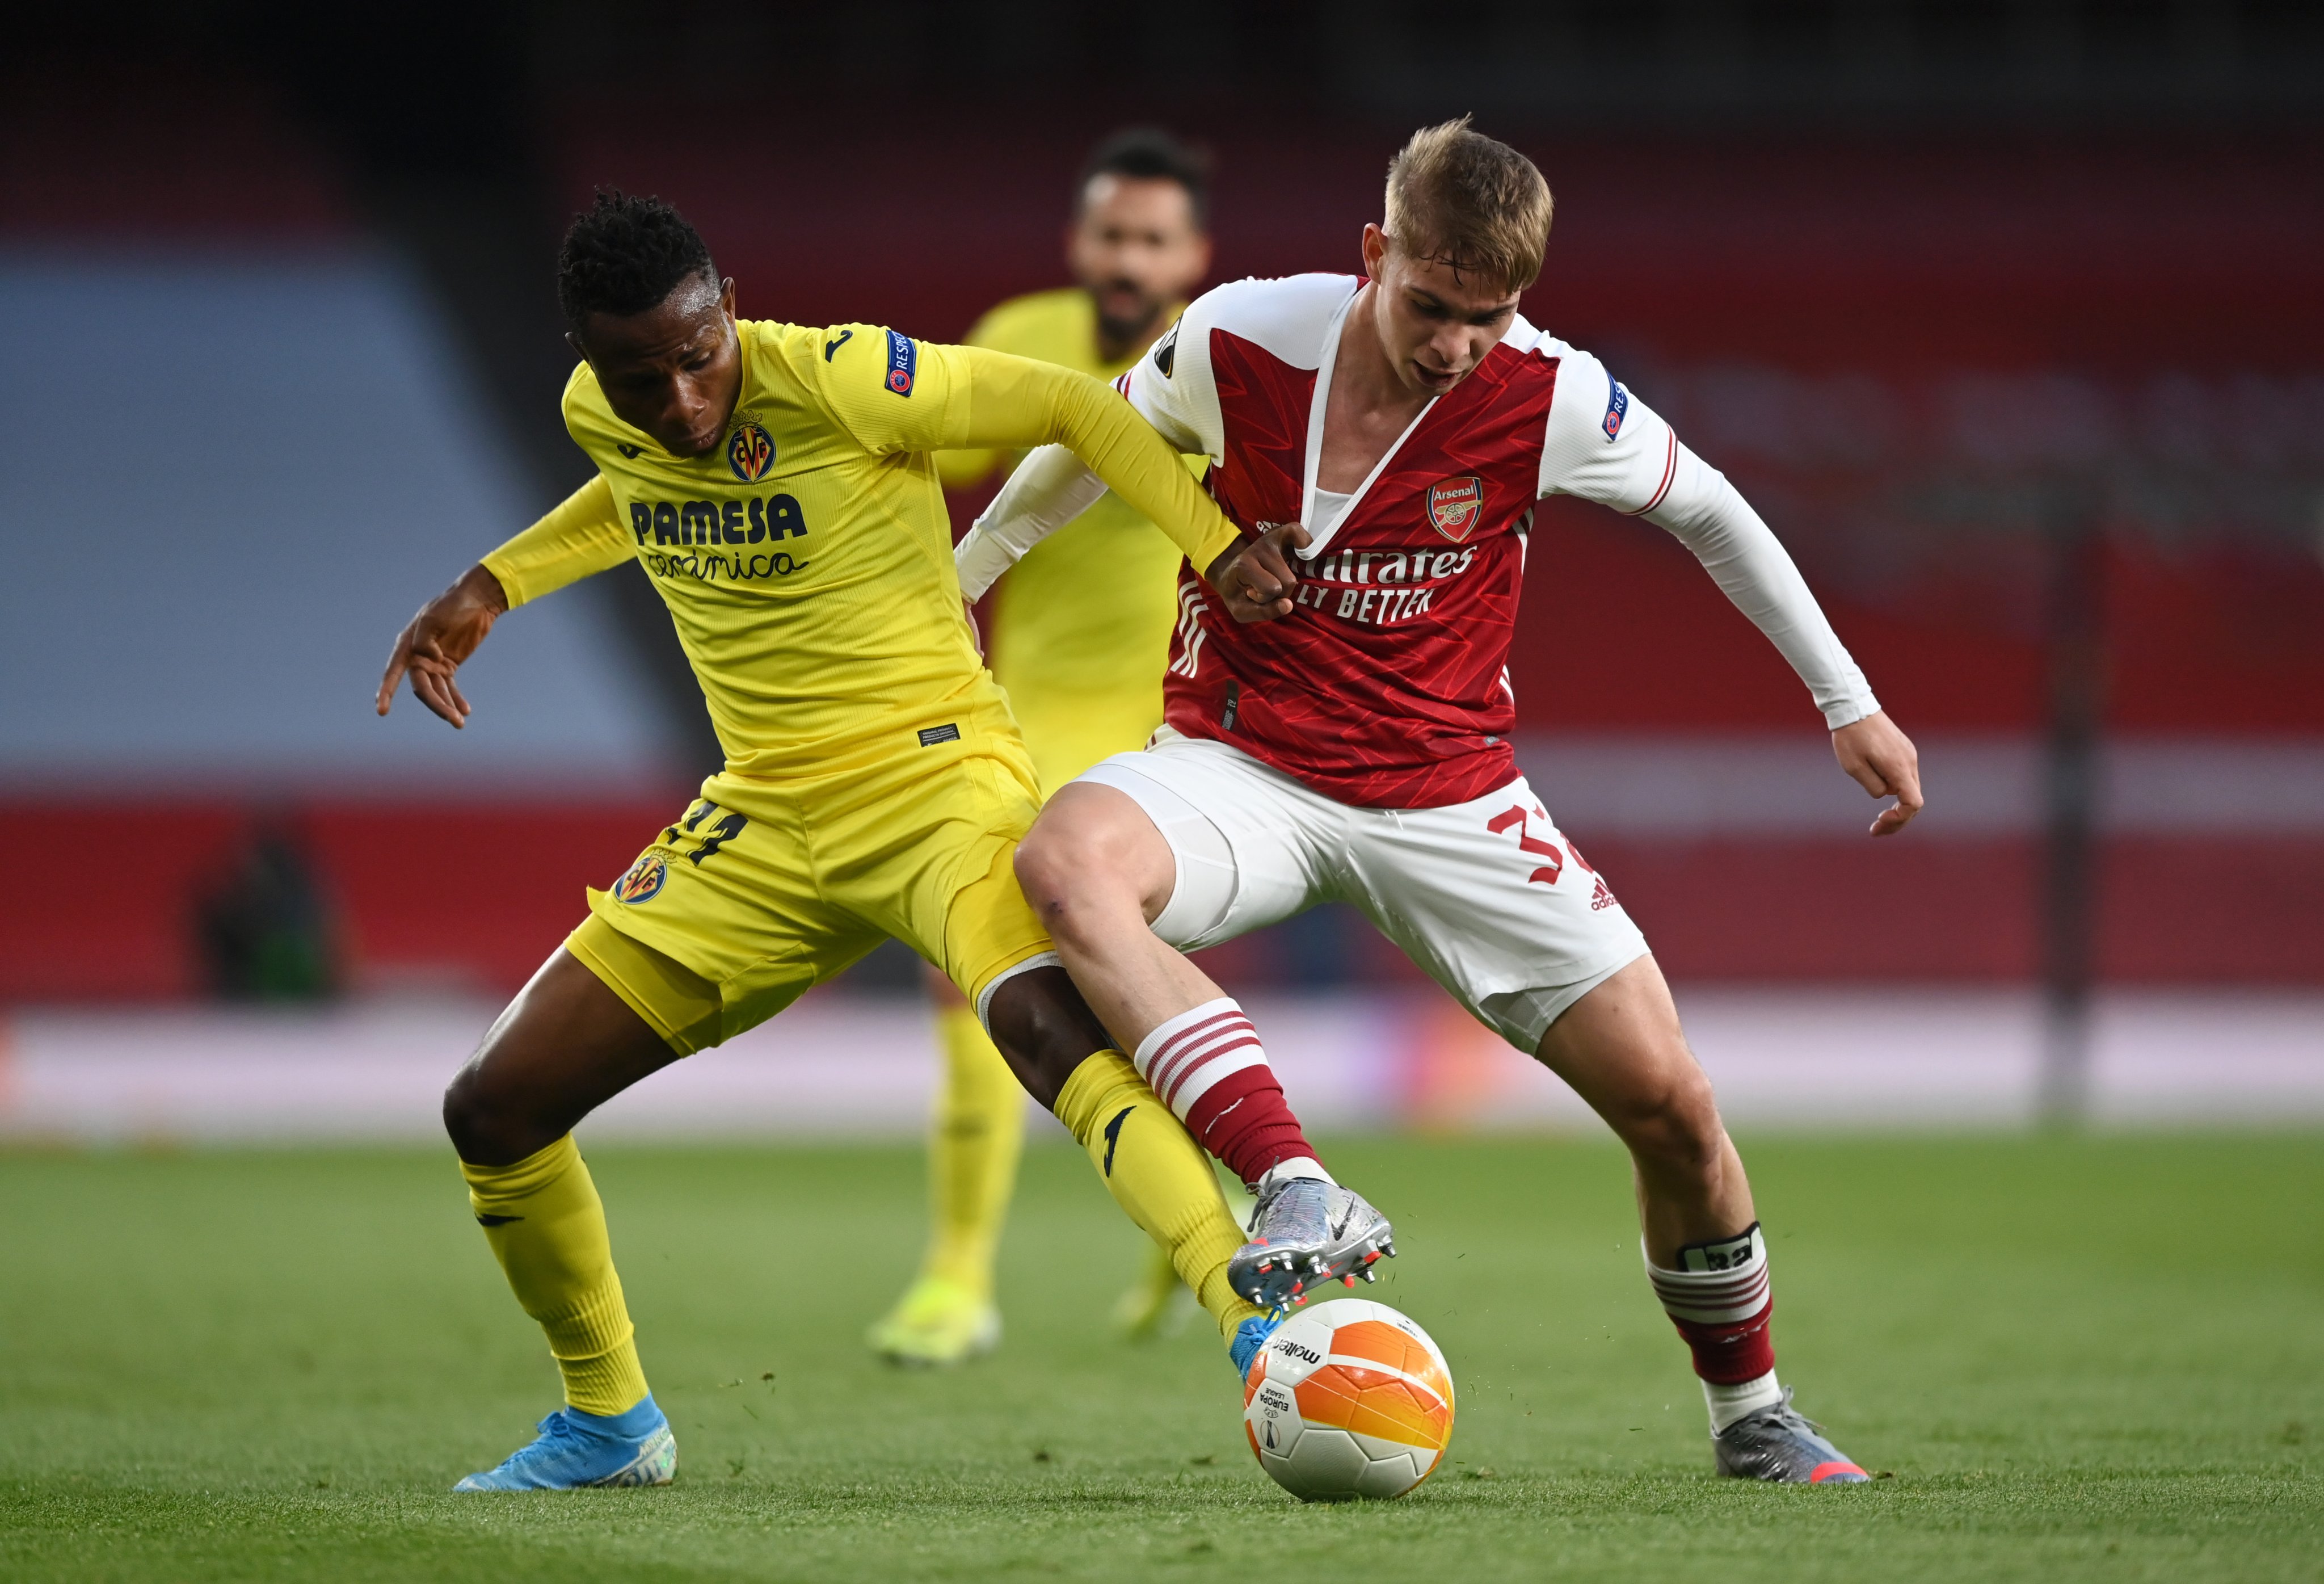 Emile Smith Rowe battles for the ball